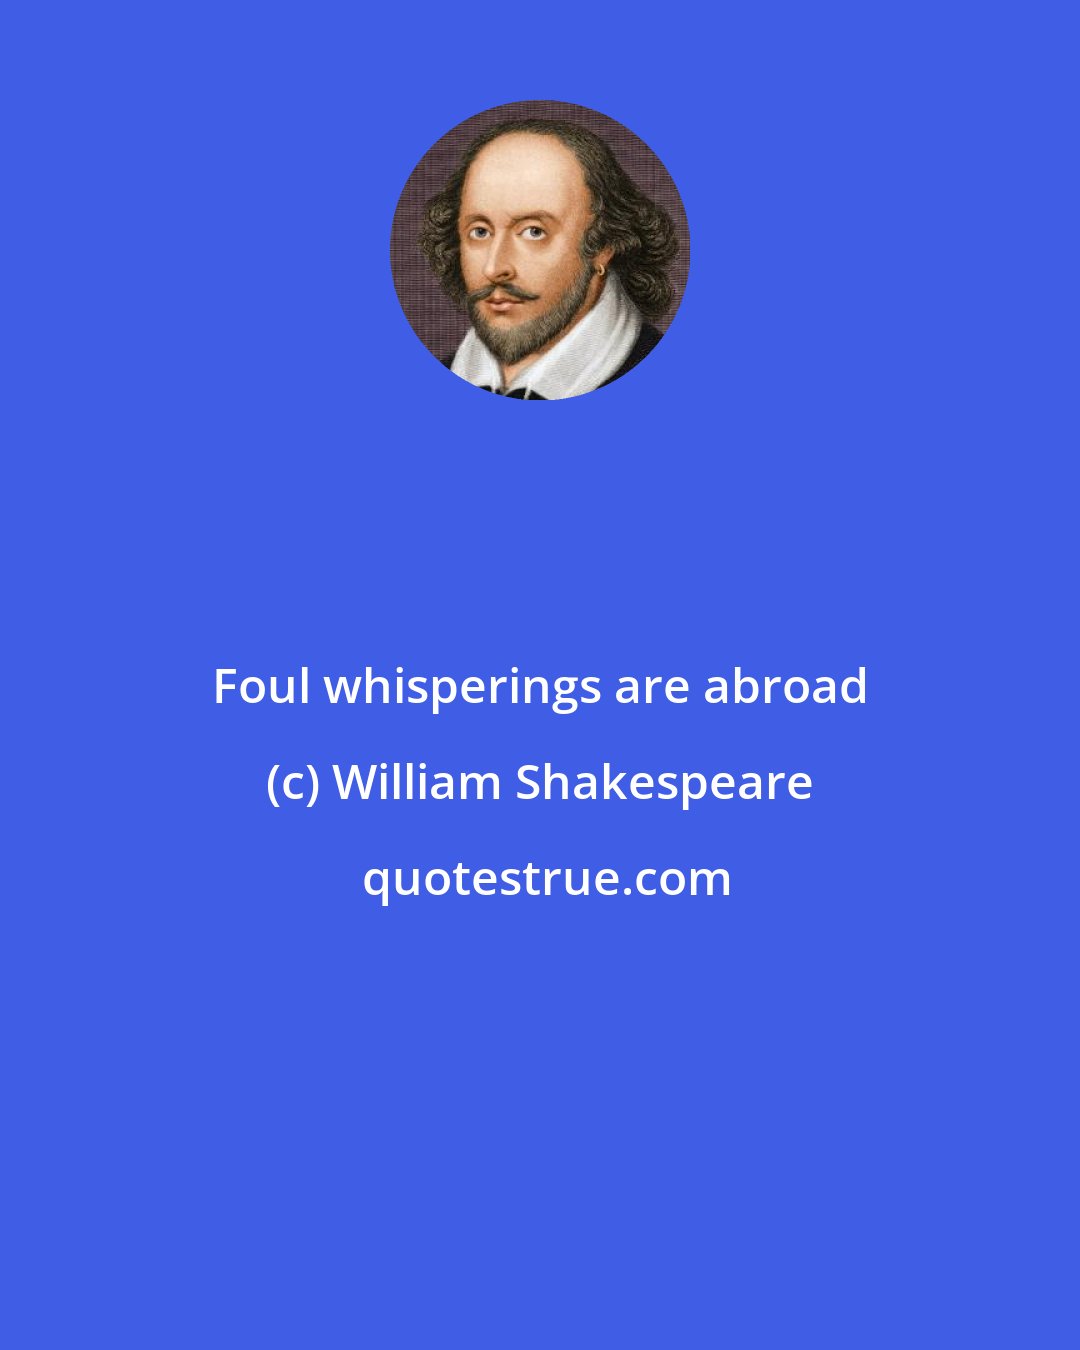 William Shakespeare: Foul whisperings are abroad